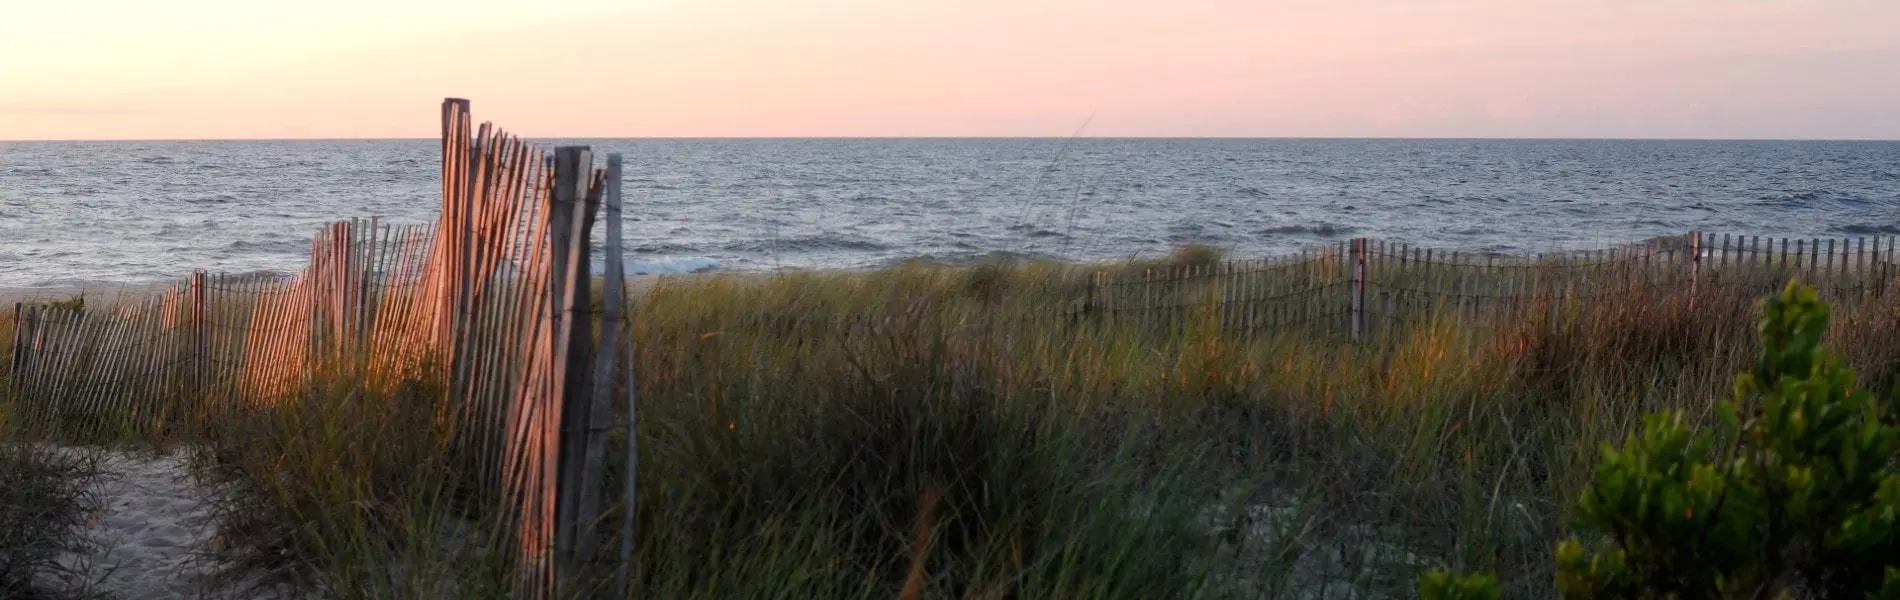 Pathway to the beach during sunset in South Bethany, Delaware